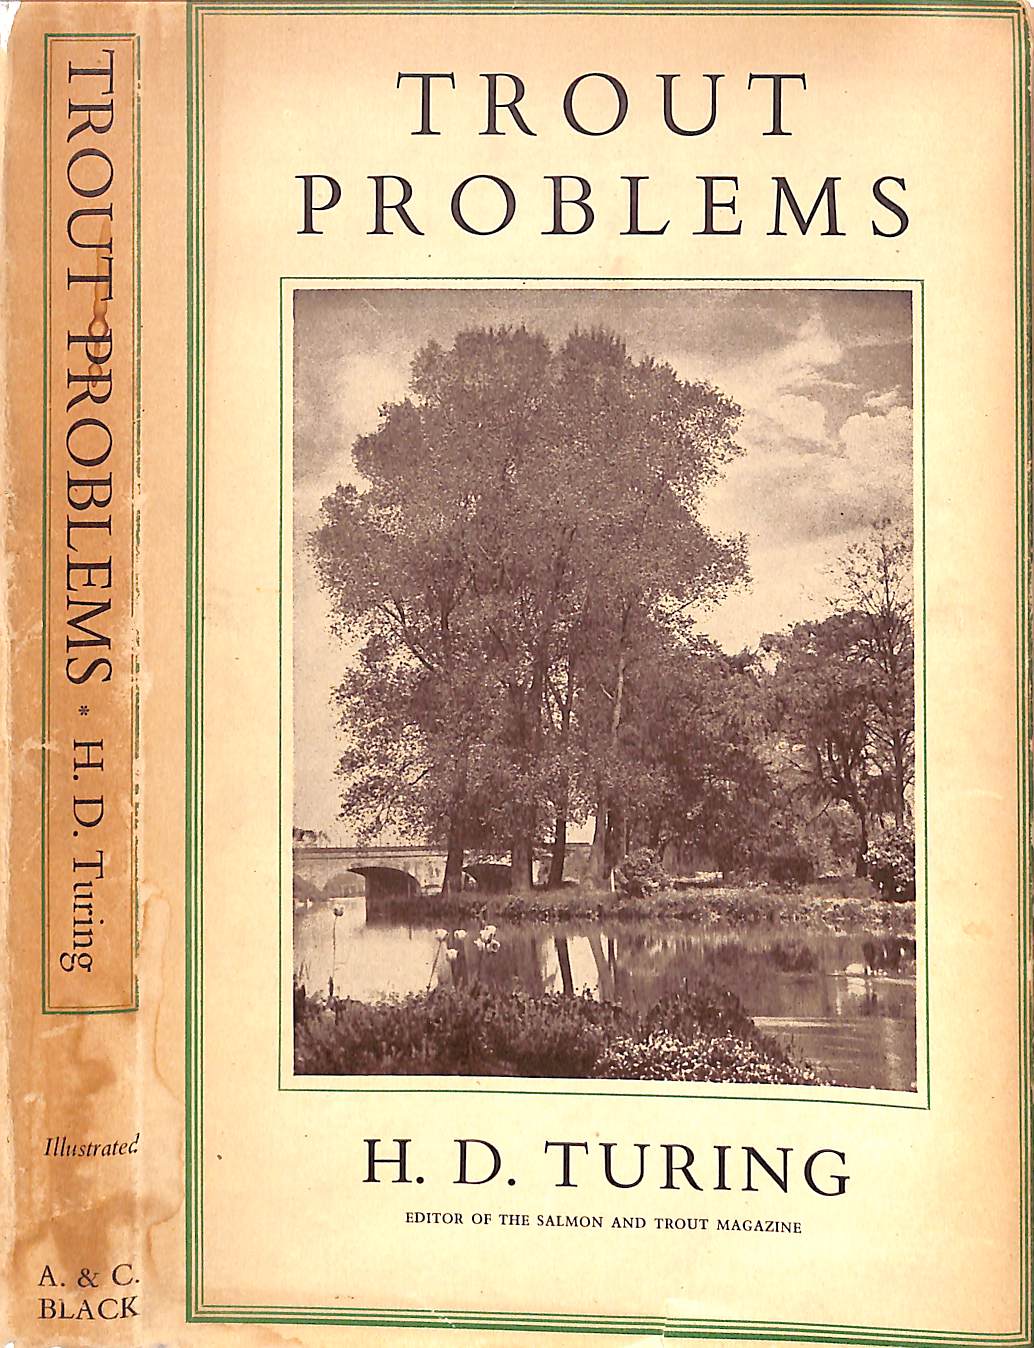 "Trout Problems" 1948 TURING, H. D.